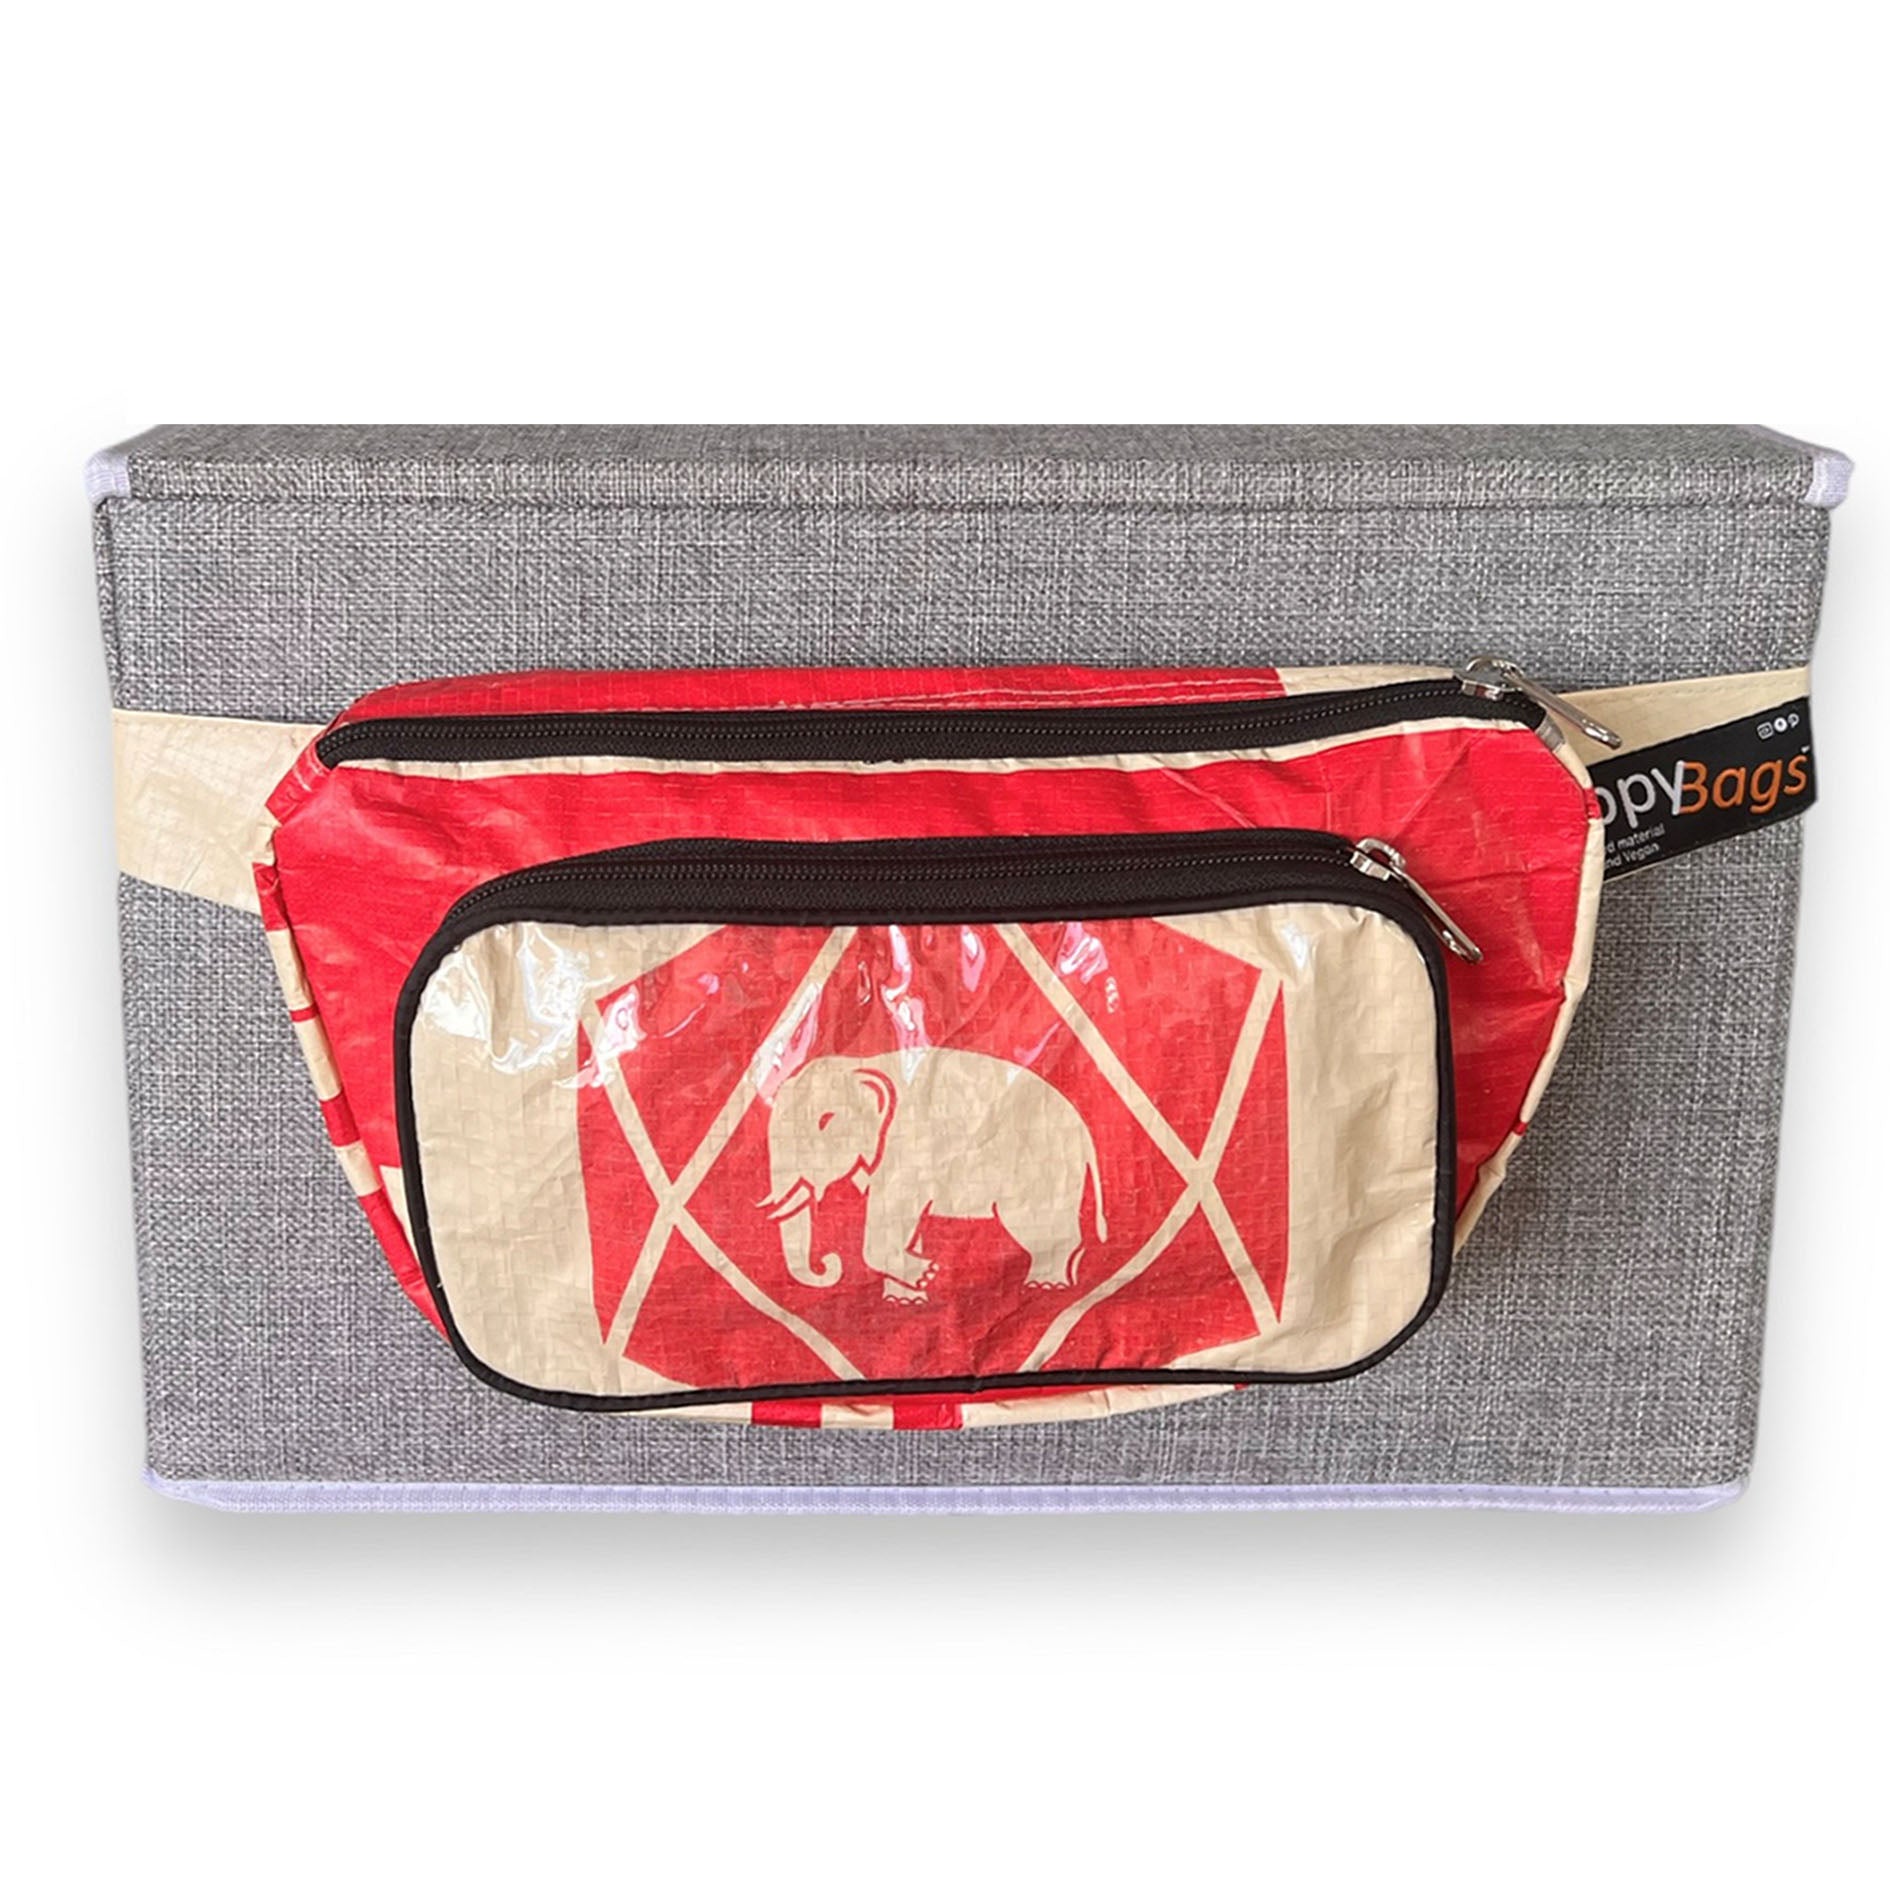 Recycled material bumbag with elephant , recycled bags uk, sustainable bumabag with elephant print UppyBags  Edit alt text